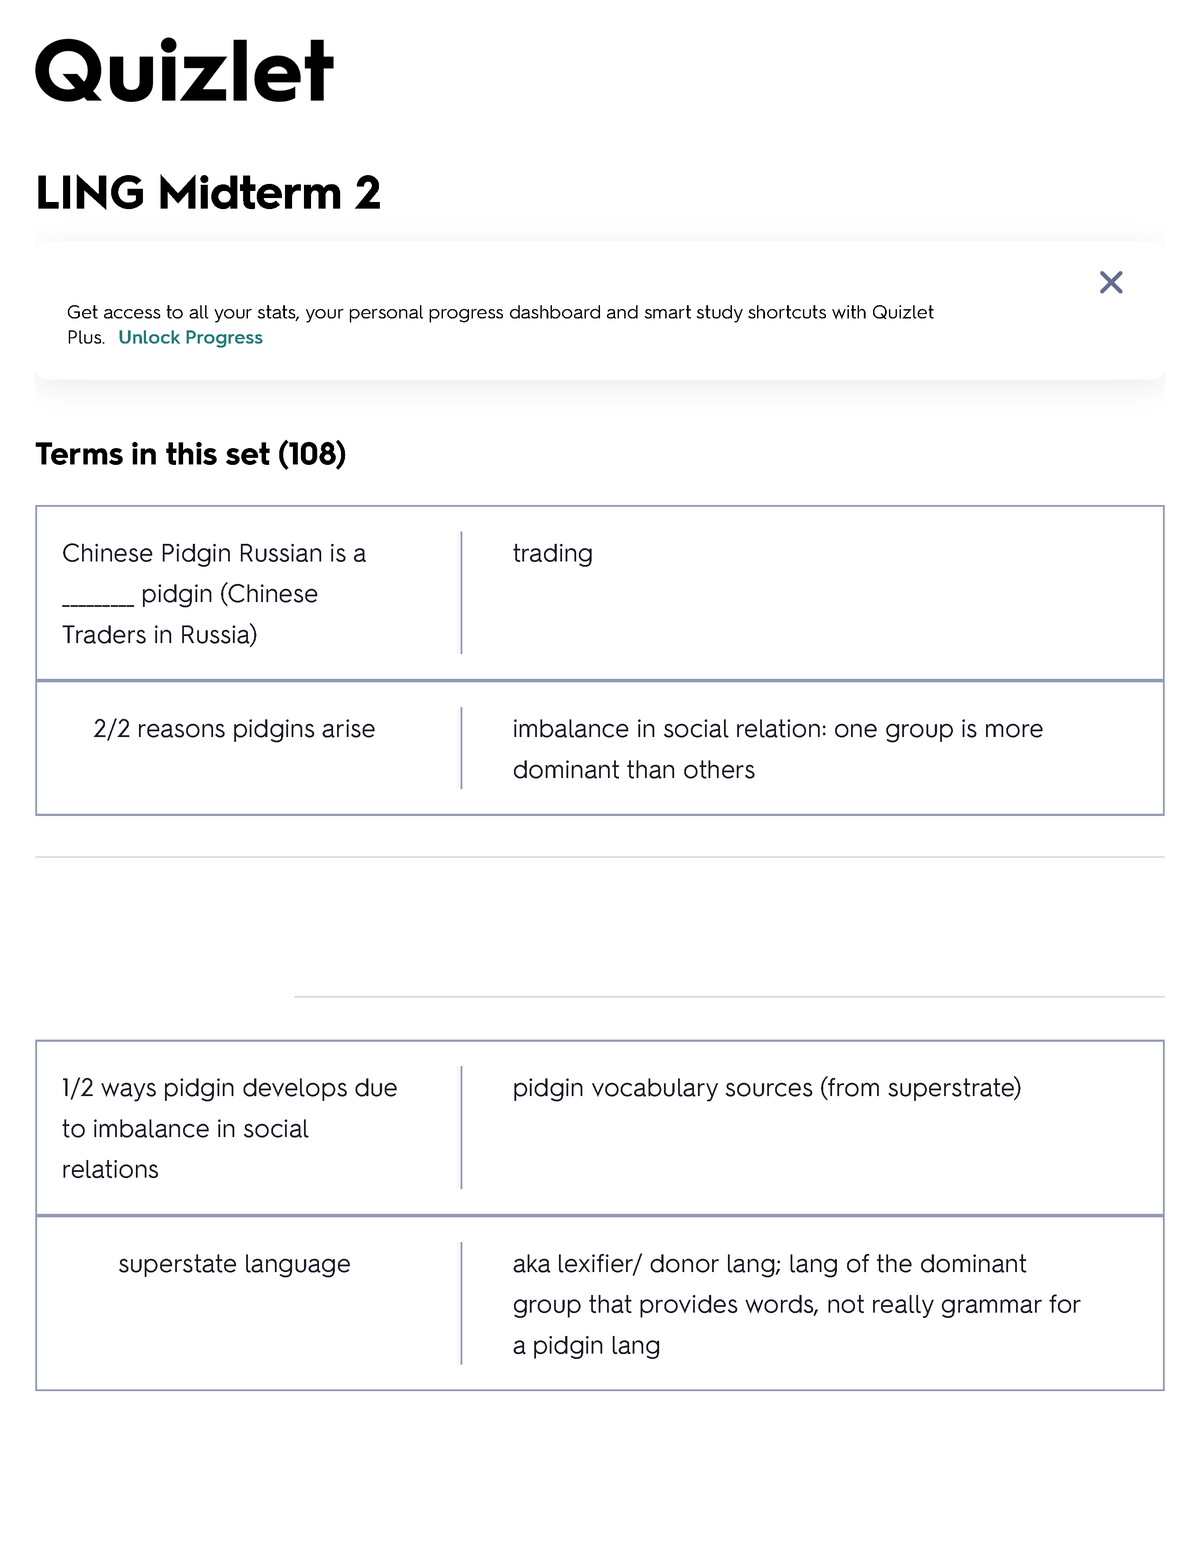 Midterm 2 Quizlet using Lecture Notes (Units 57) LING Midterm 2 Get